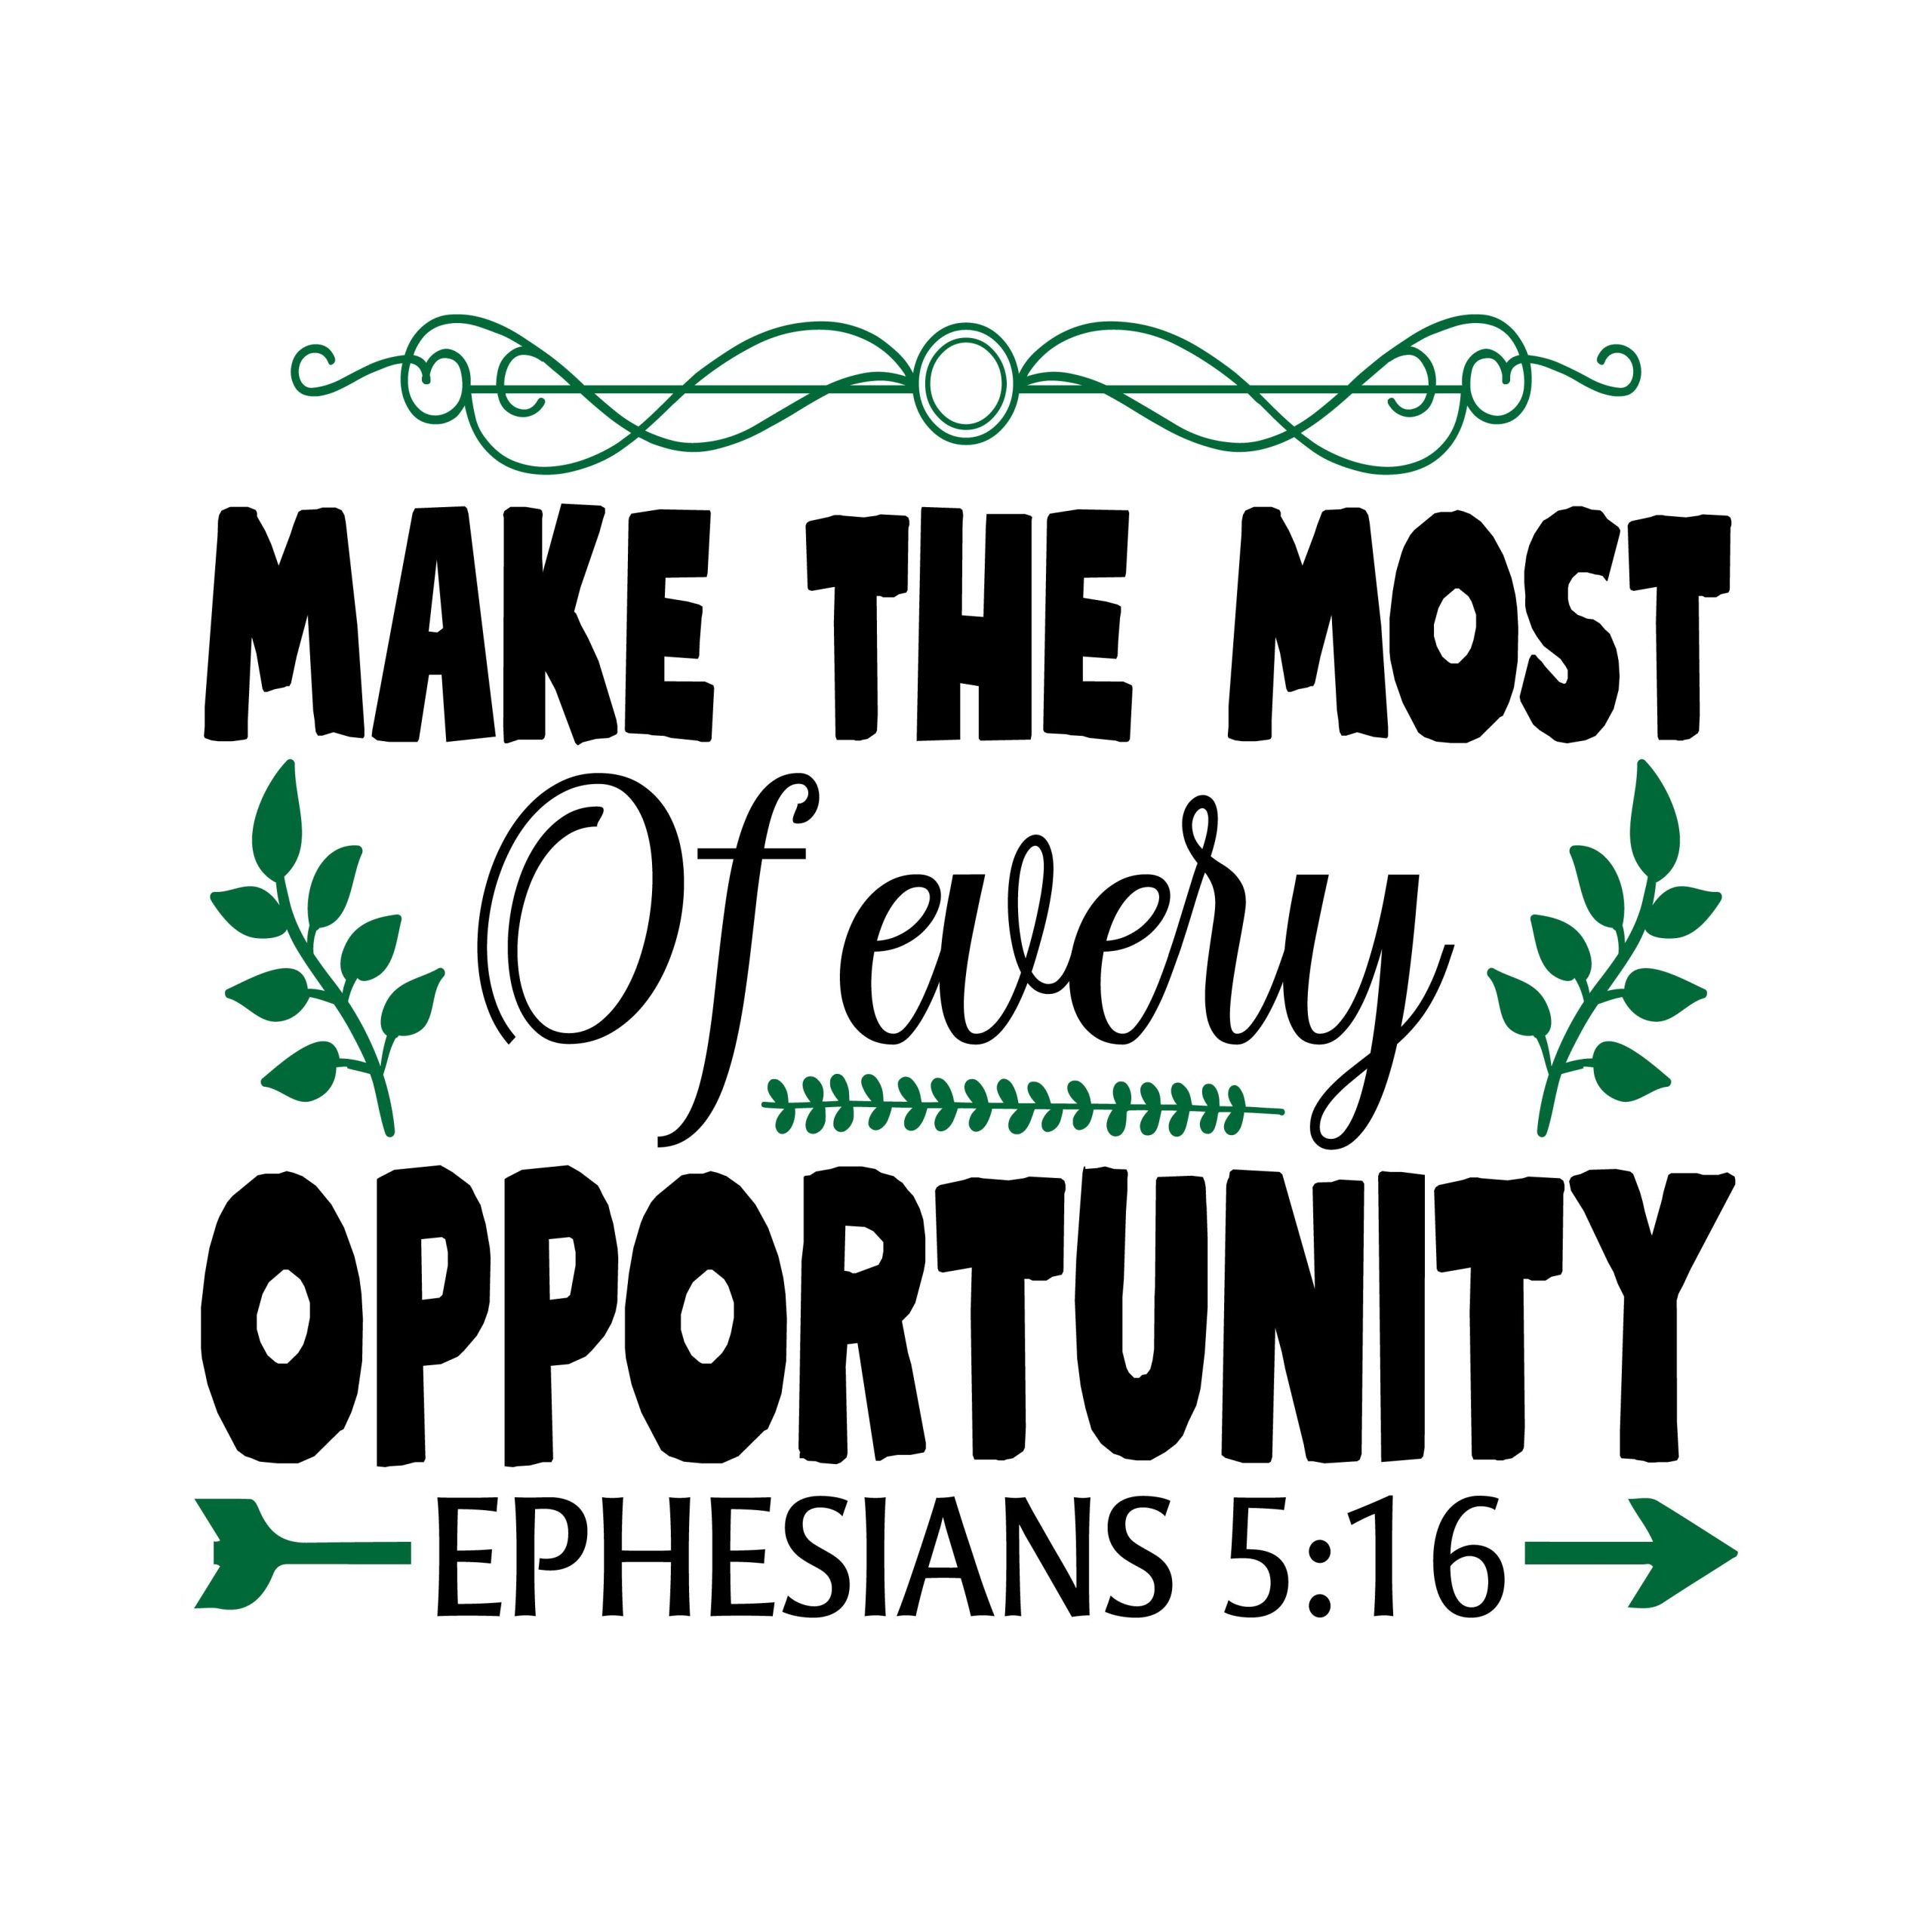 Make the most of every opportunity Ephesians 5:16, bible verses, scripture verses, svg files, passages, sayings, cricut designs, silhouette, embroidery, bundle, free cut files, design space, vector